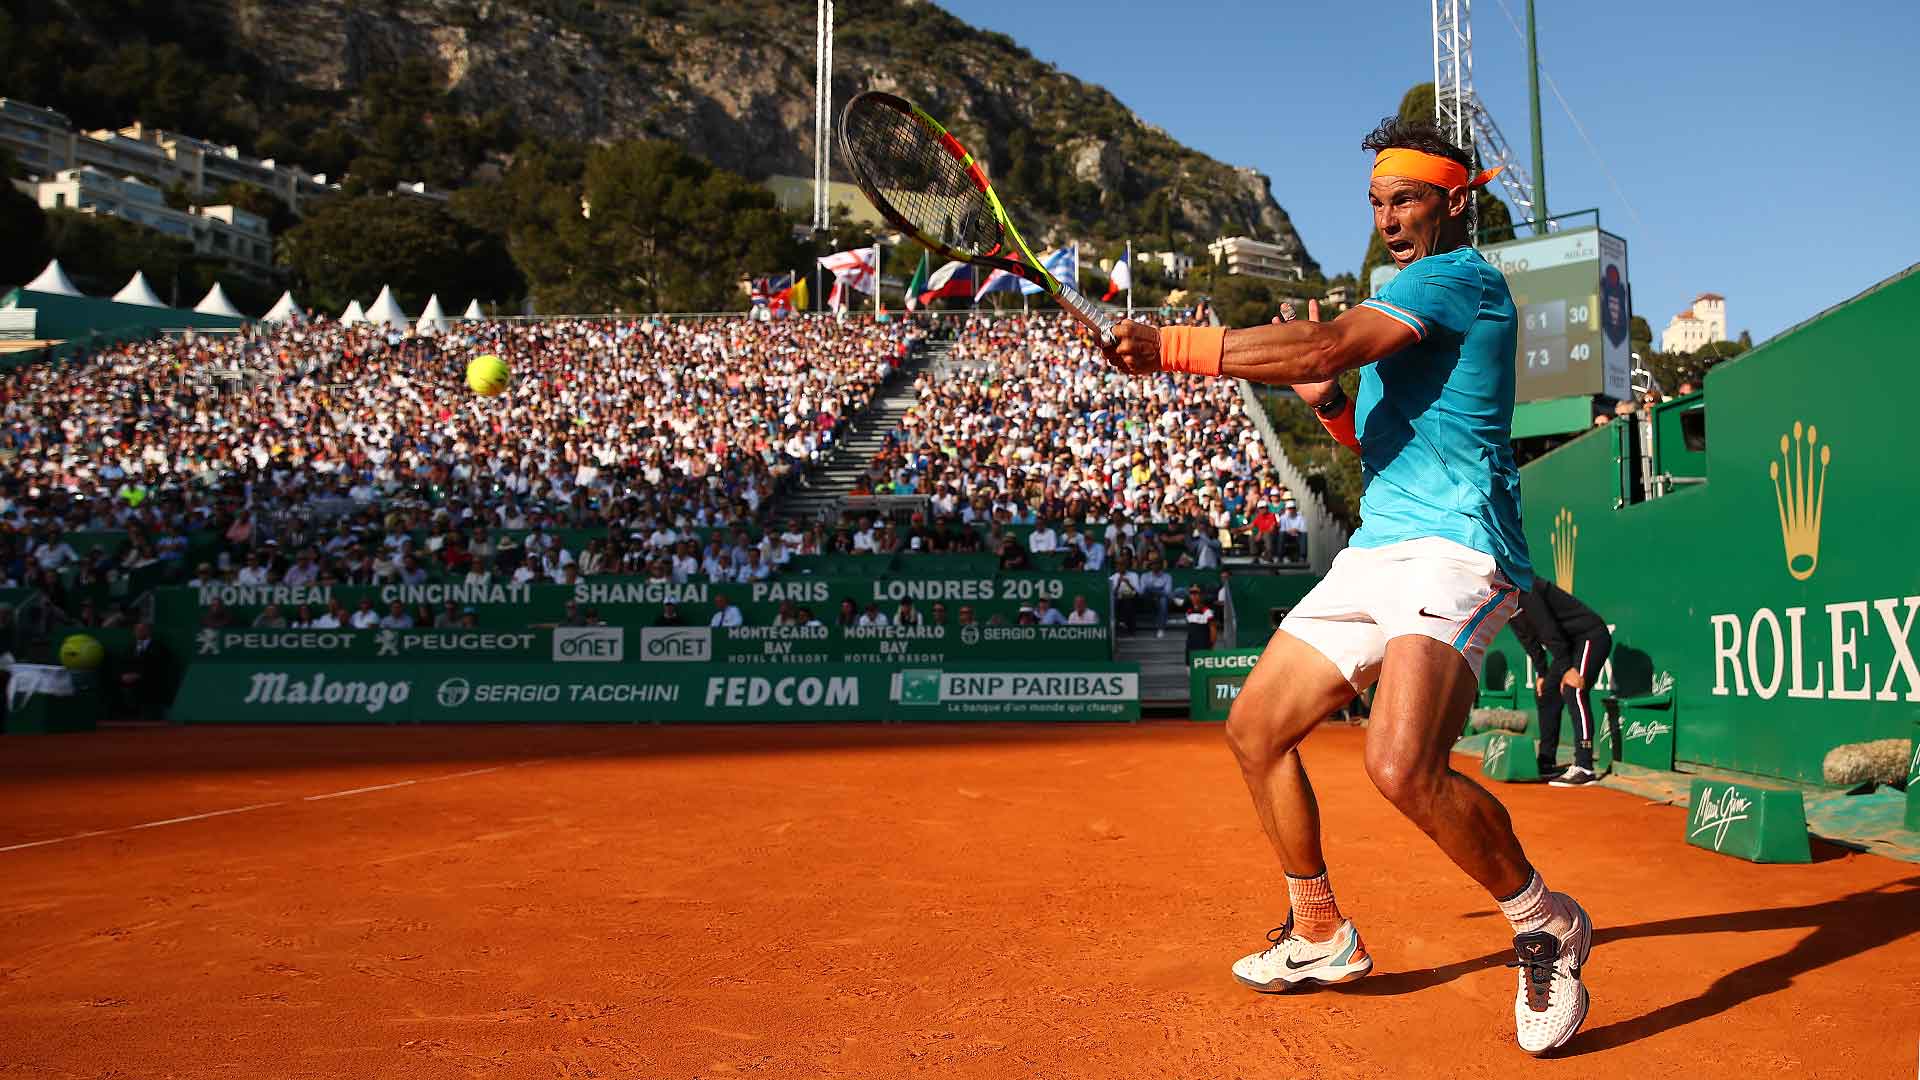 2 Players Box Tickets to the ATP Monte-Carlo Rolex Masters on April 10 2022 